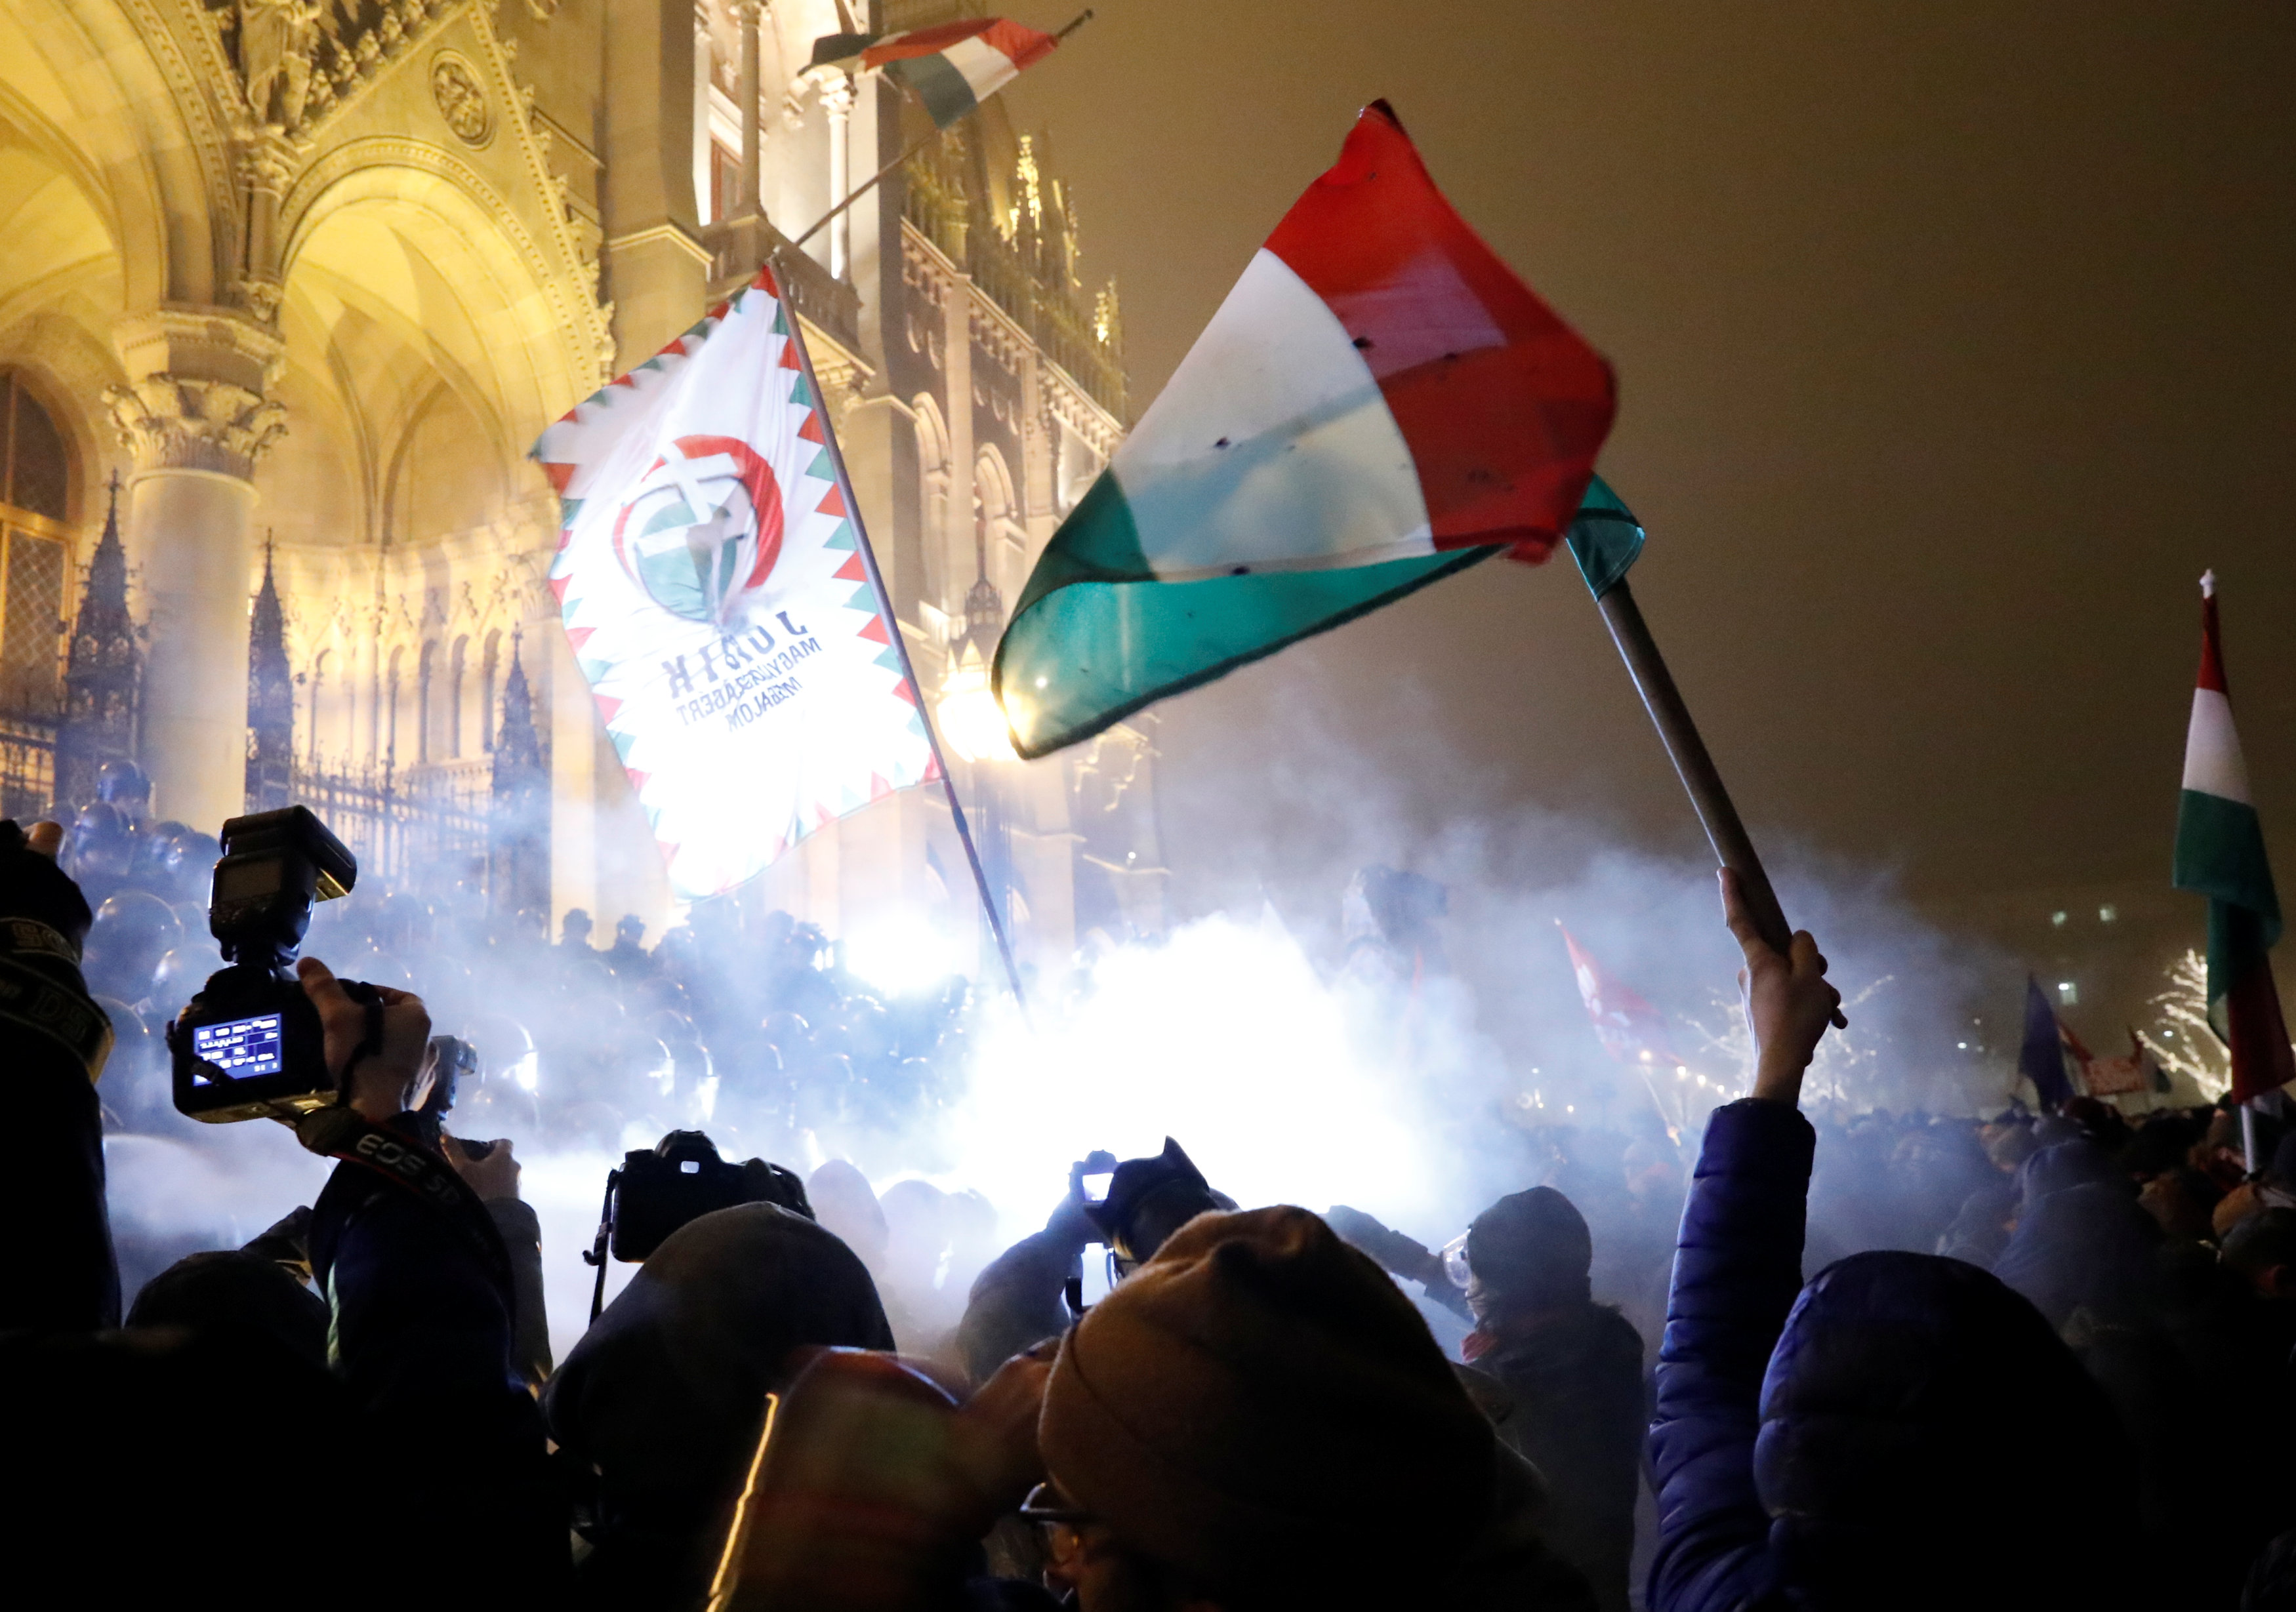 2018-12-13T203921Z_1049231531_RC13B8539D80_RTRMADP_3_HUNGARY-PROTESTS